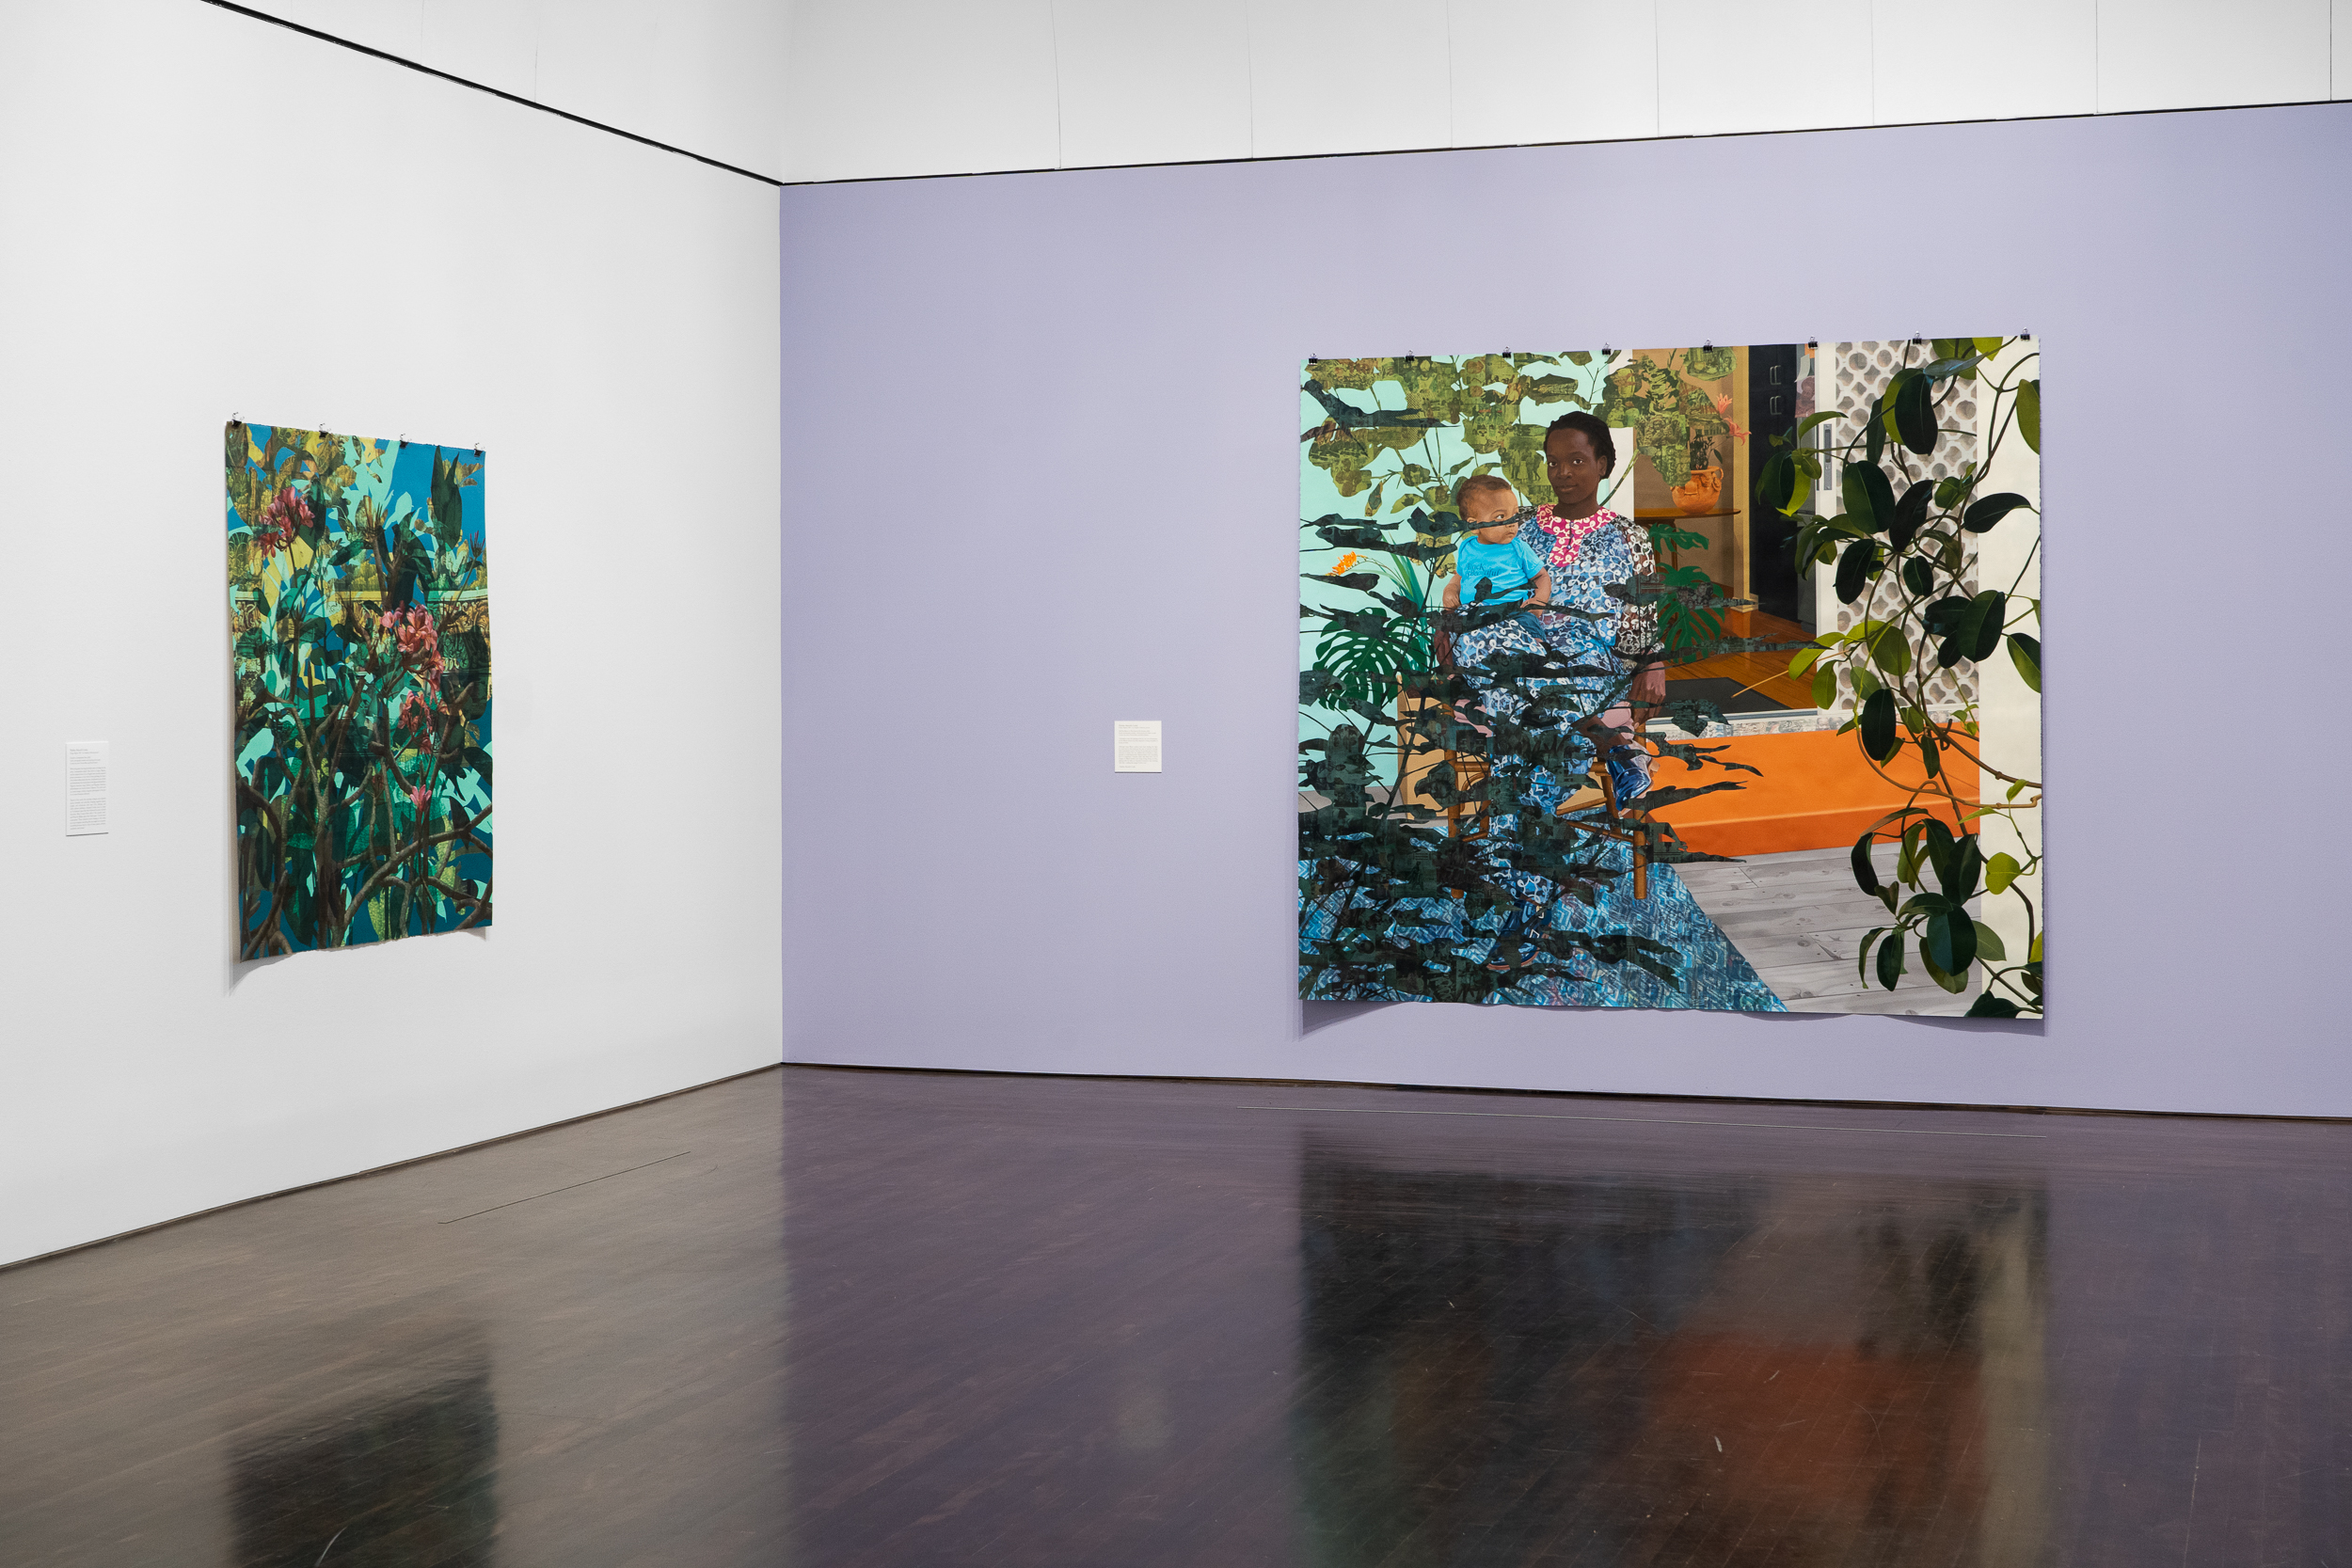 Gallery walls with works featuring elements such as plants and people. One large work work on the right is hung on a lilac-colored wall